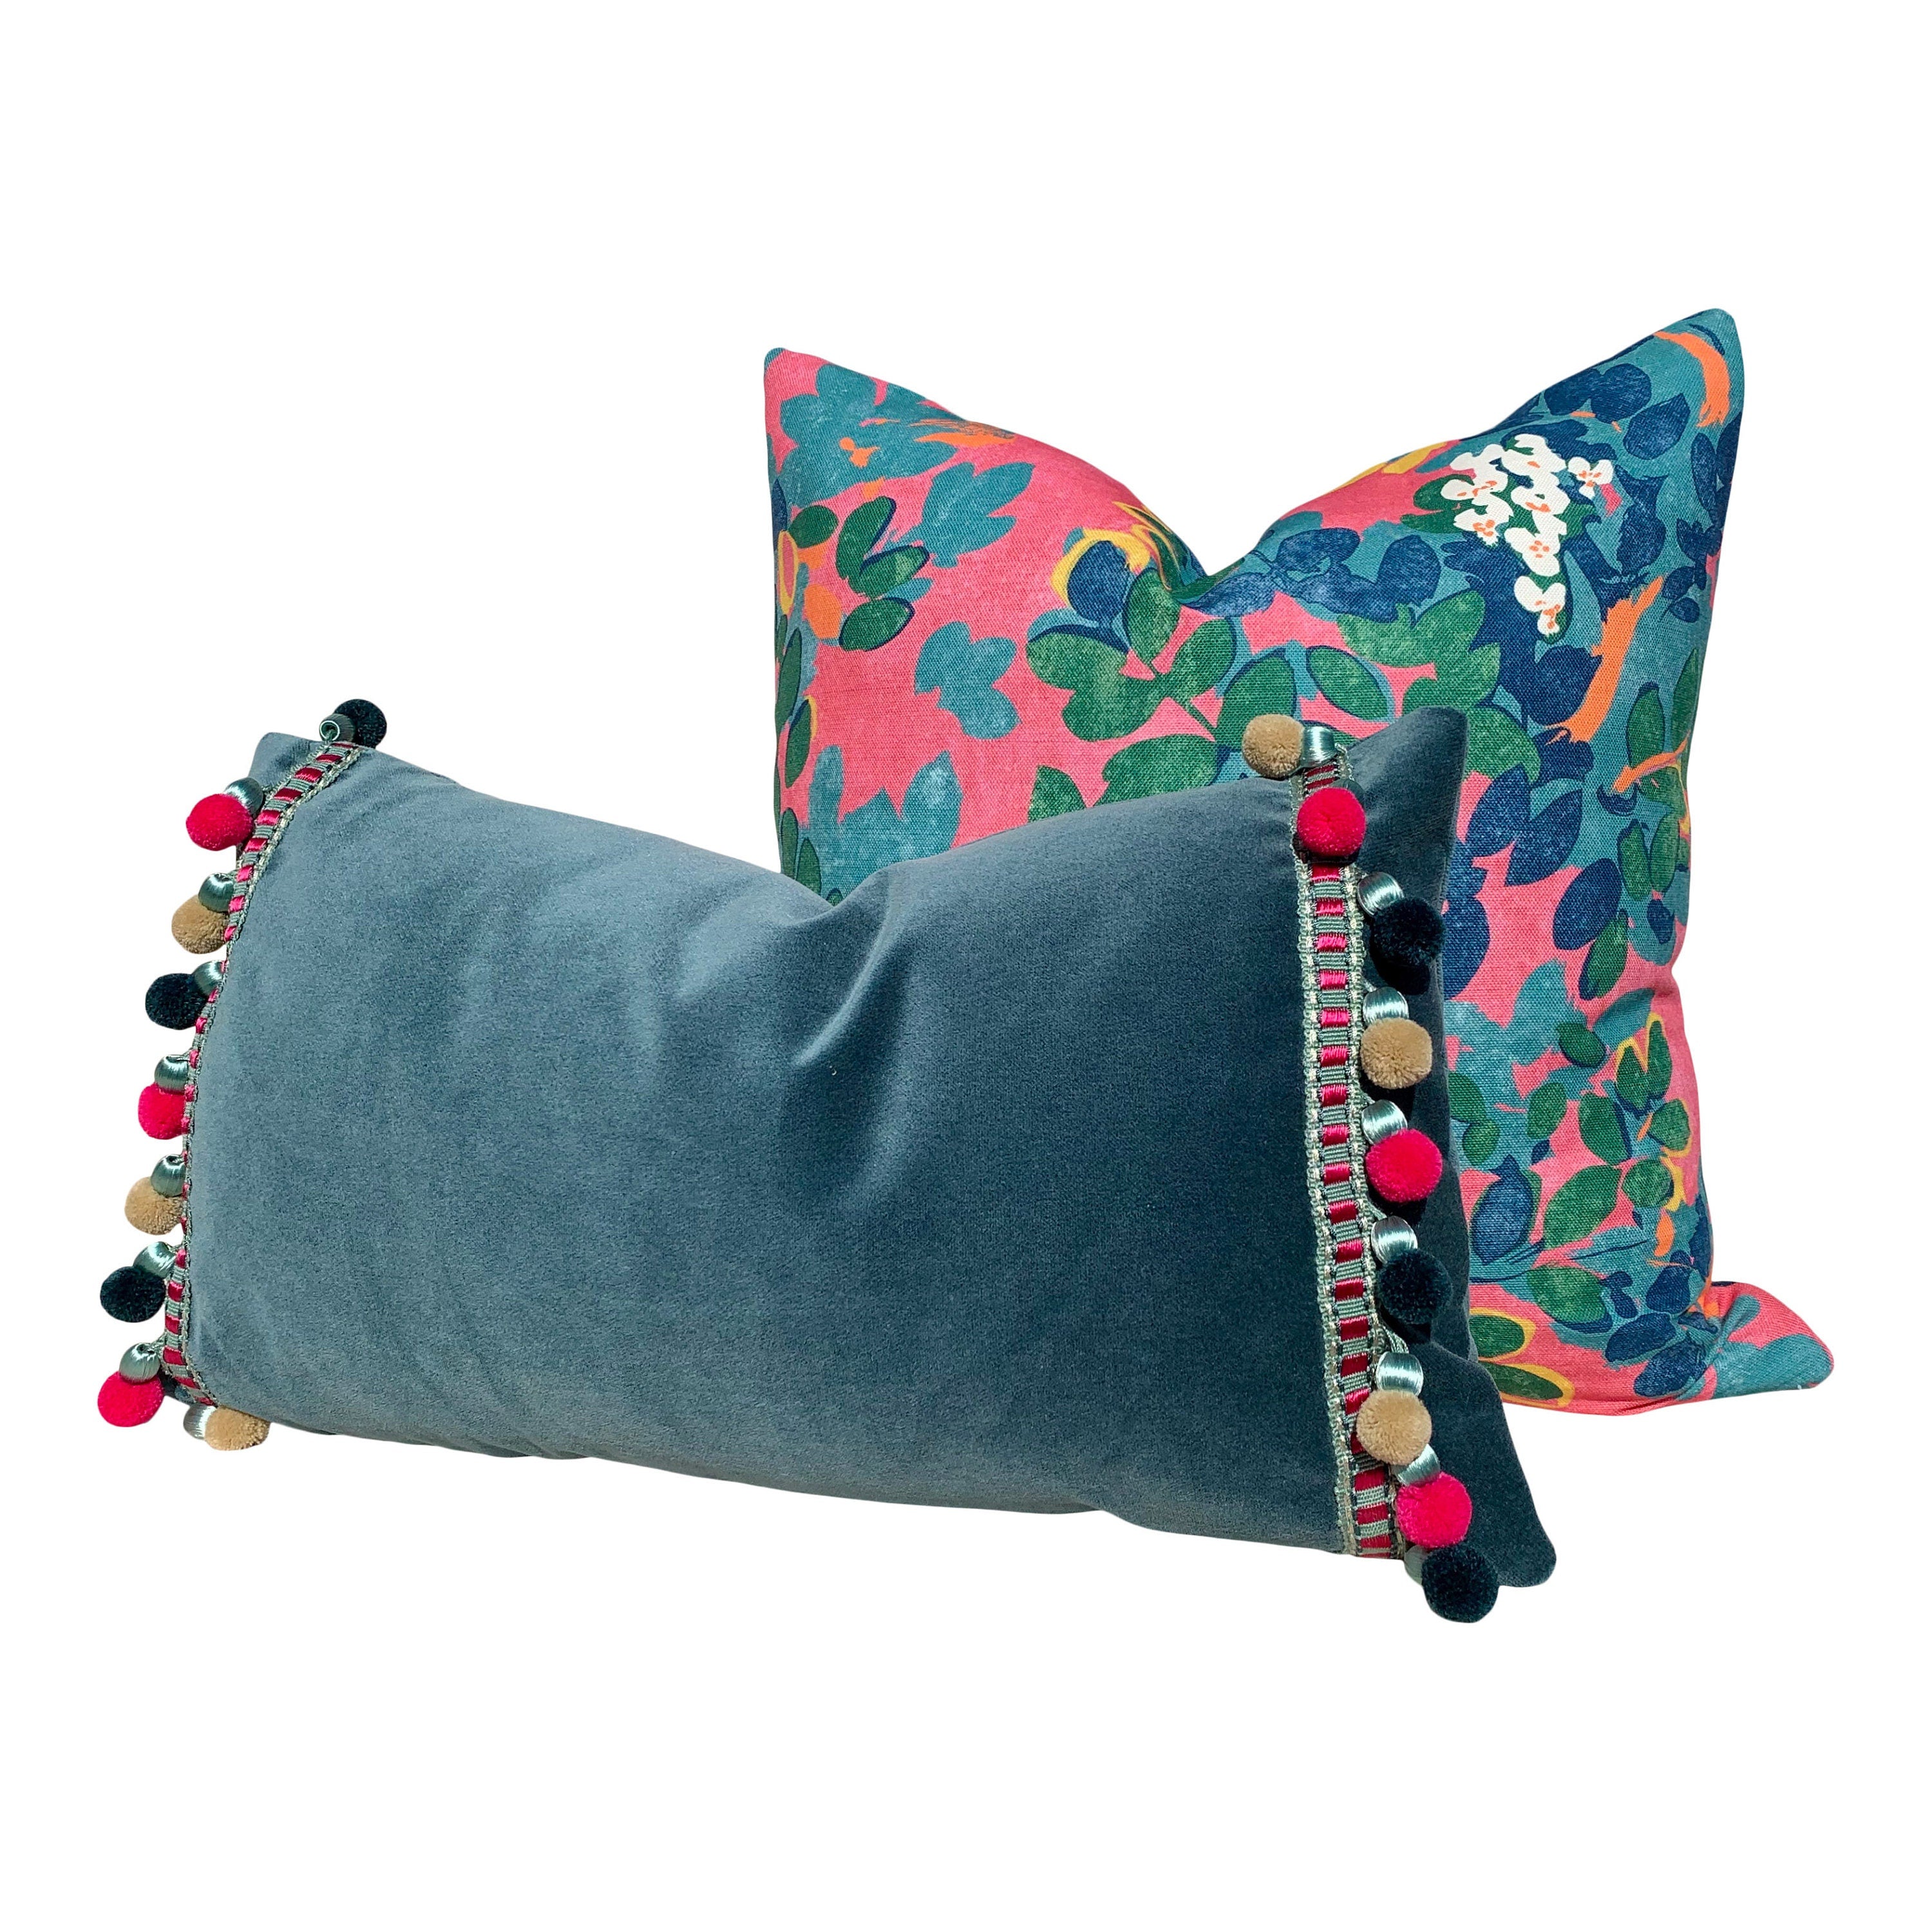 Thibaut Central Park Pillow in Teal and Pink. Designer Pillow Cover, Accent lumbar pillow, High End Floral Pillow Sham